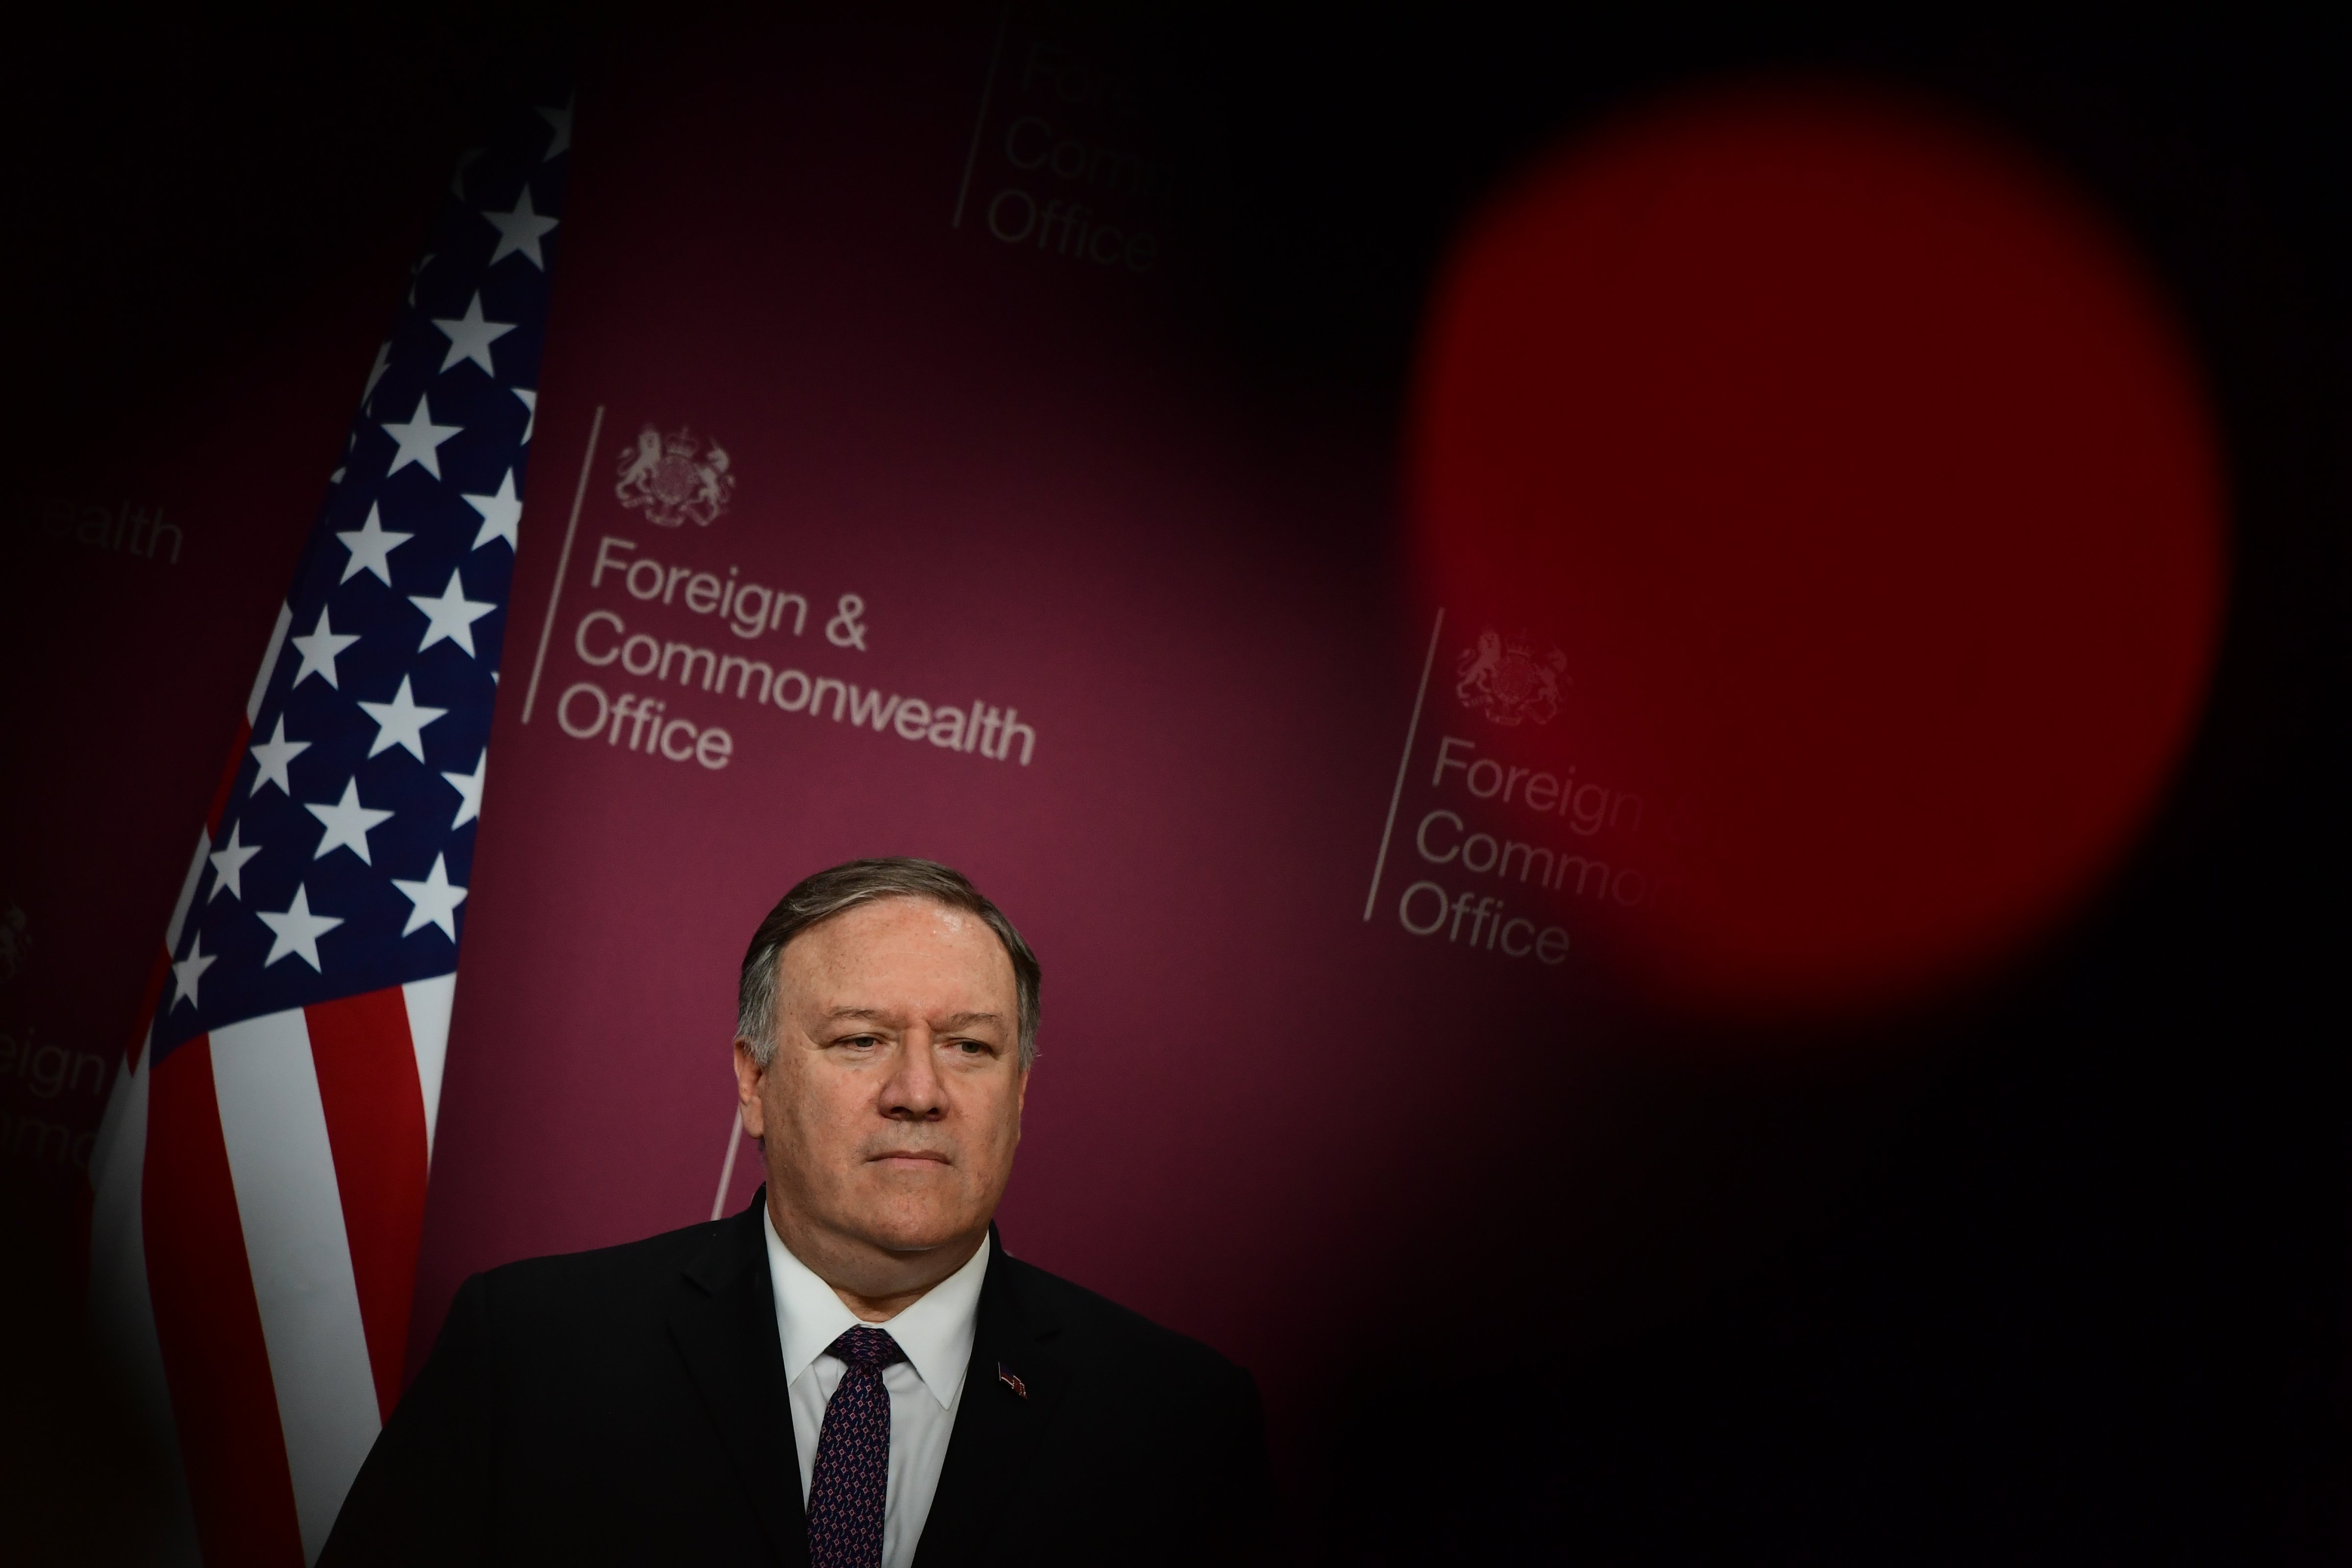 LONDON, ENGLAND - MAY 08:  US Secretary of State Mike Pompeo attends a joint press conference with Foreign Secretary Jeremy Hunt at Foreign &amp; Commonwealth Office, on May 8, 2019 in London, England. (Chris J Ratcliffe&mdash;Getty Images)